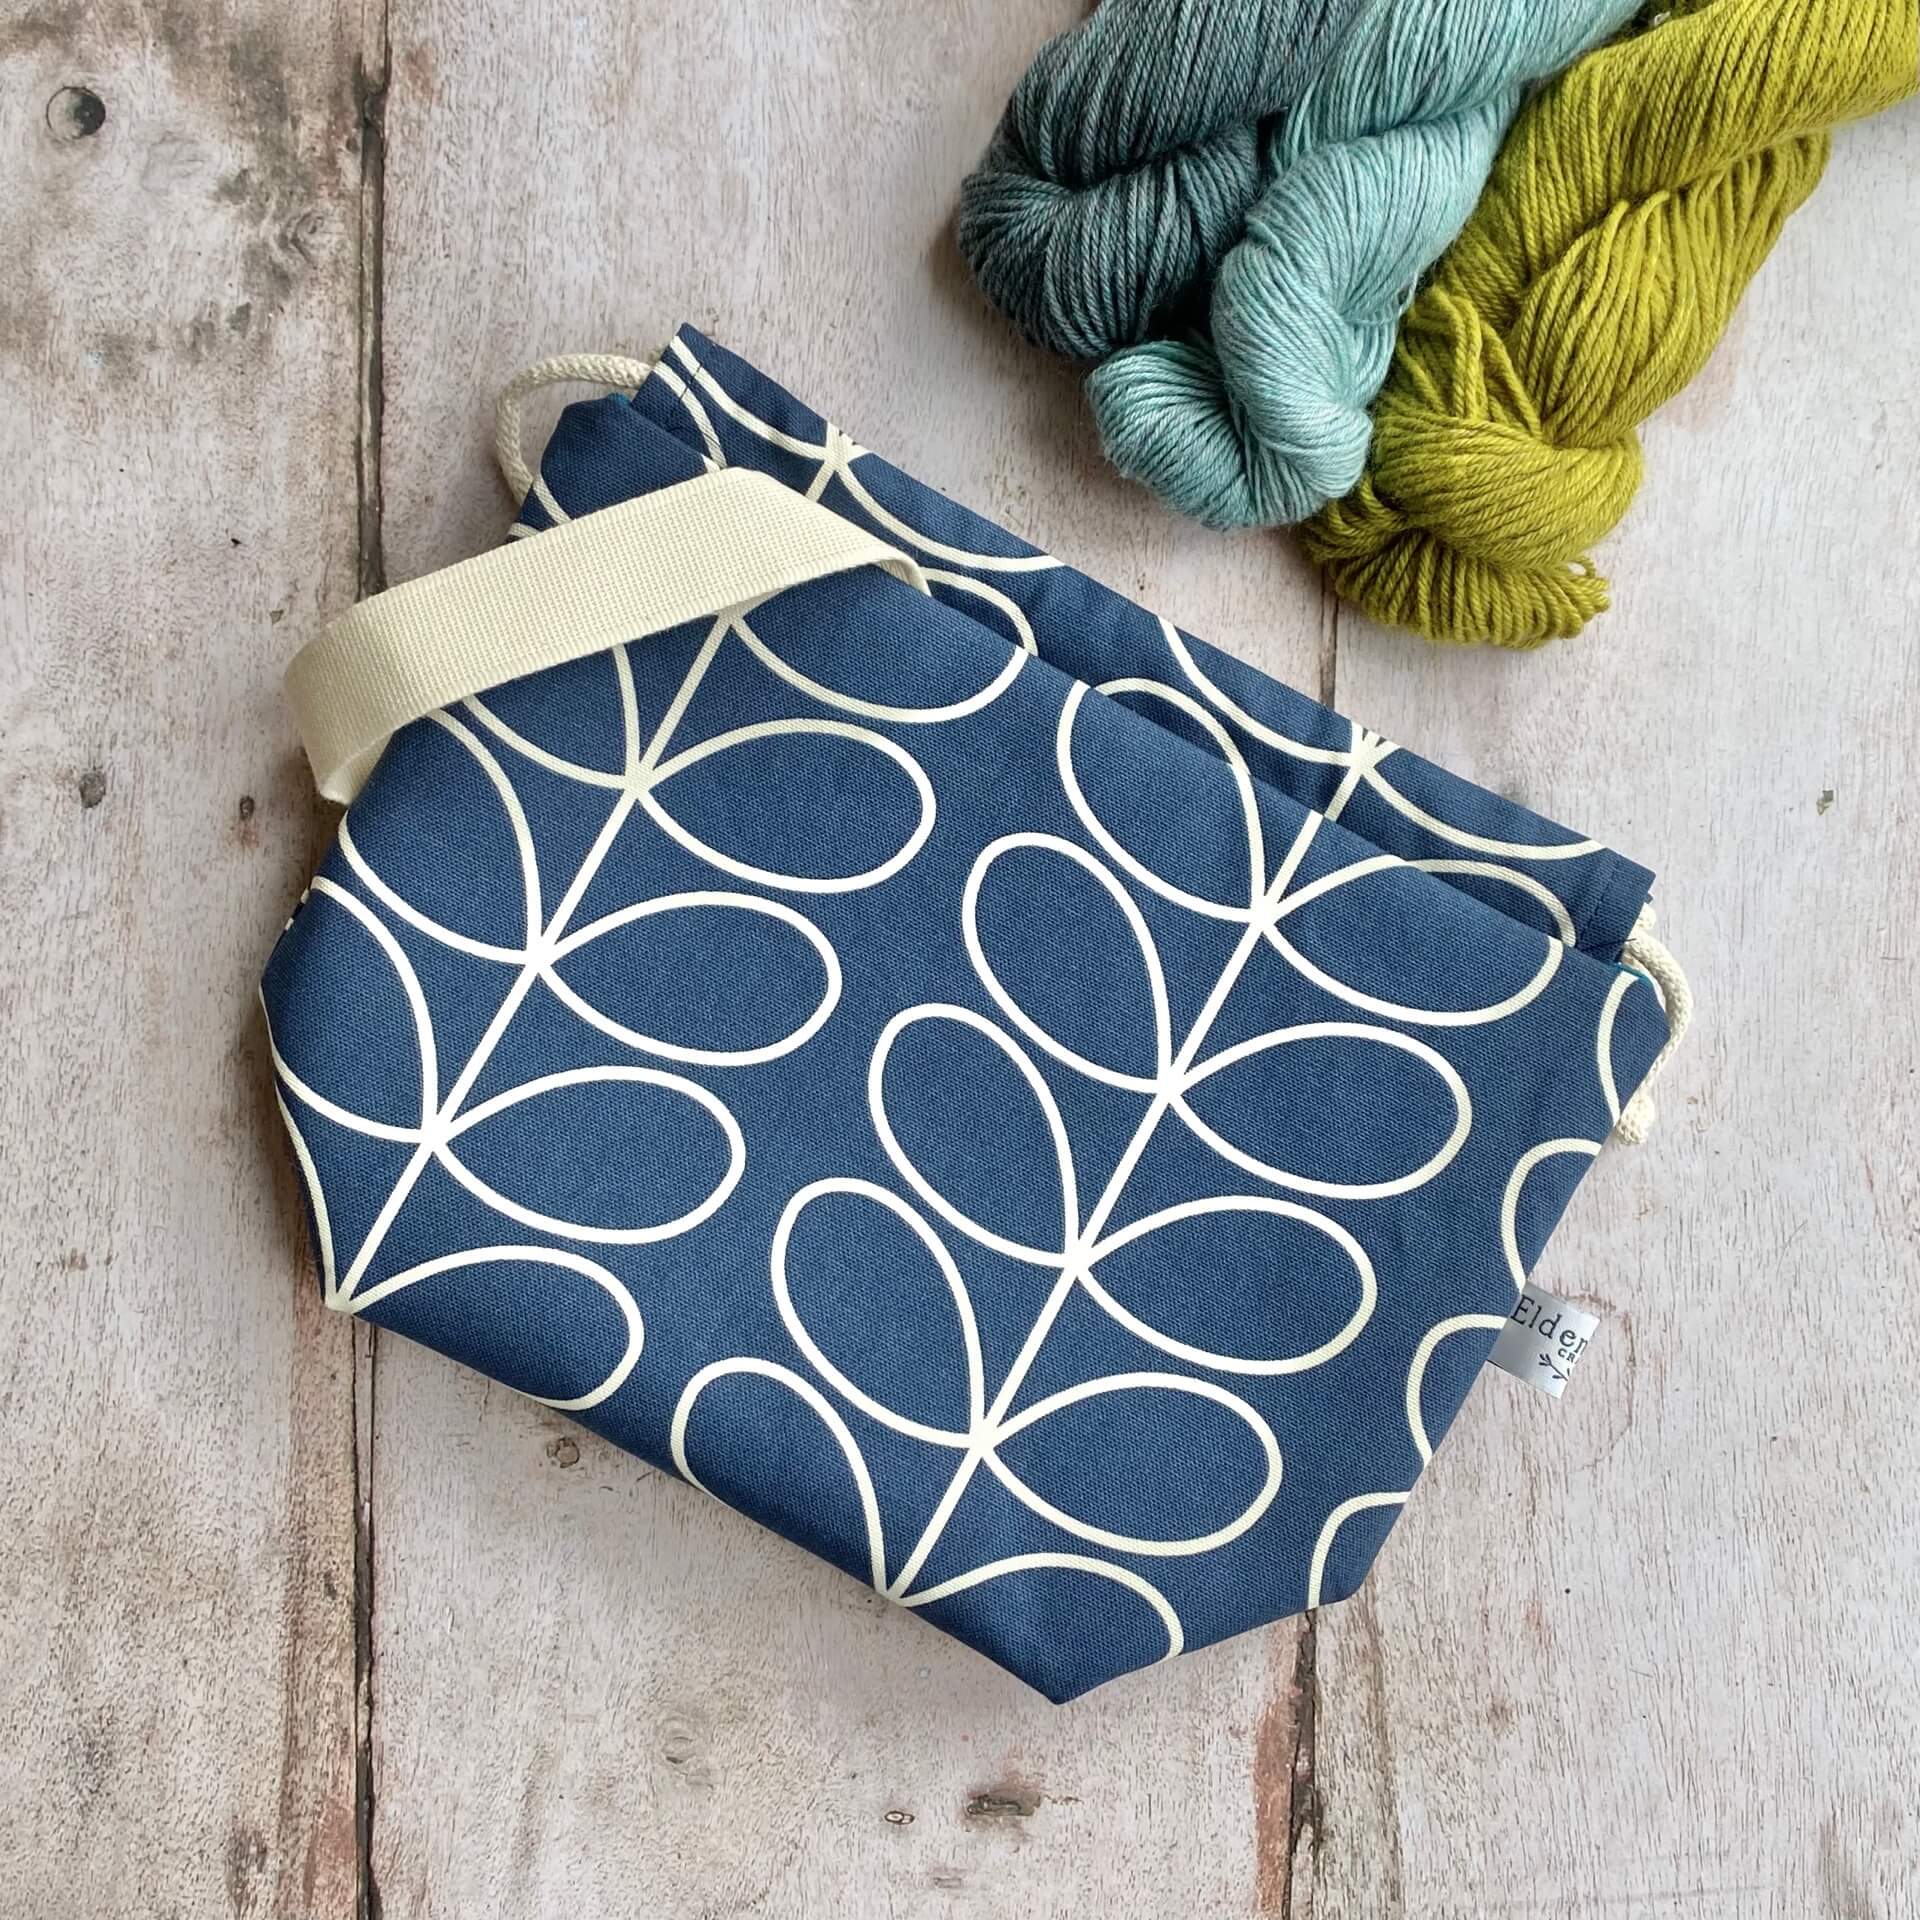 A handmade knitting project bag from Eldenwood Craft lies on a wooden table next to some yarn. The bag is made from navy fabric in a classic Orla Kiely linear stem print.